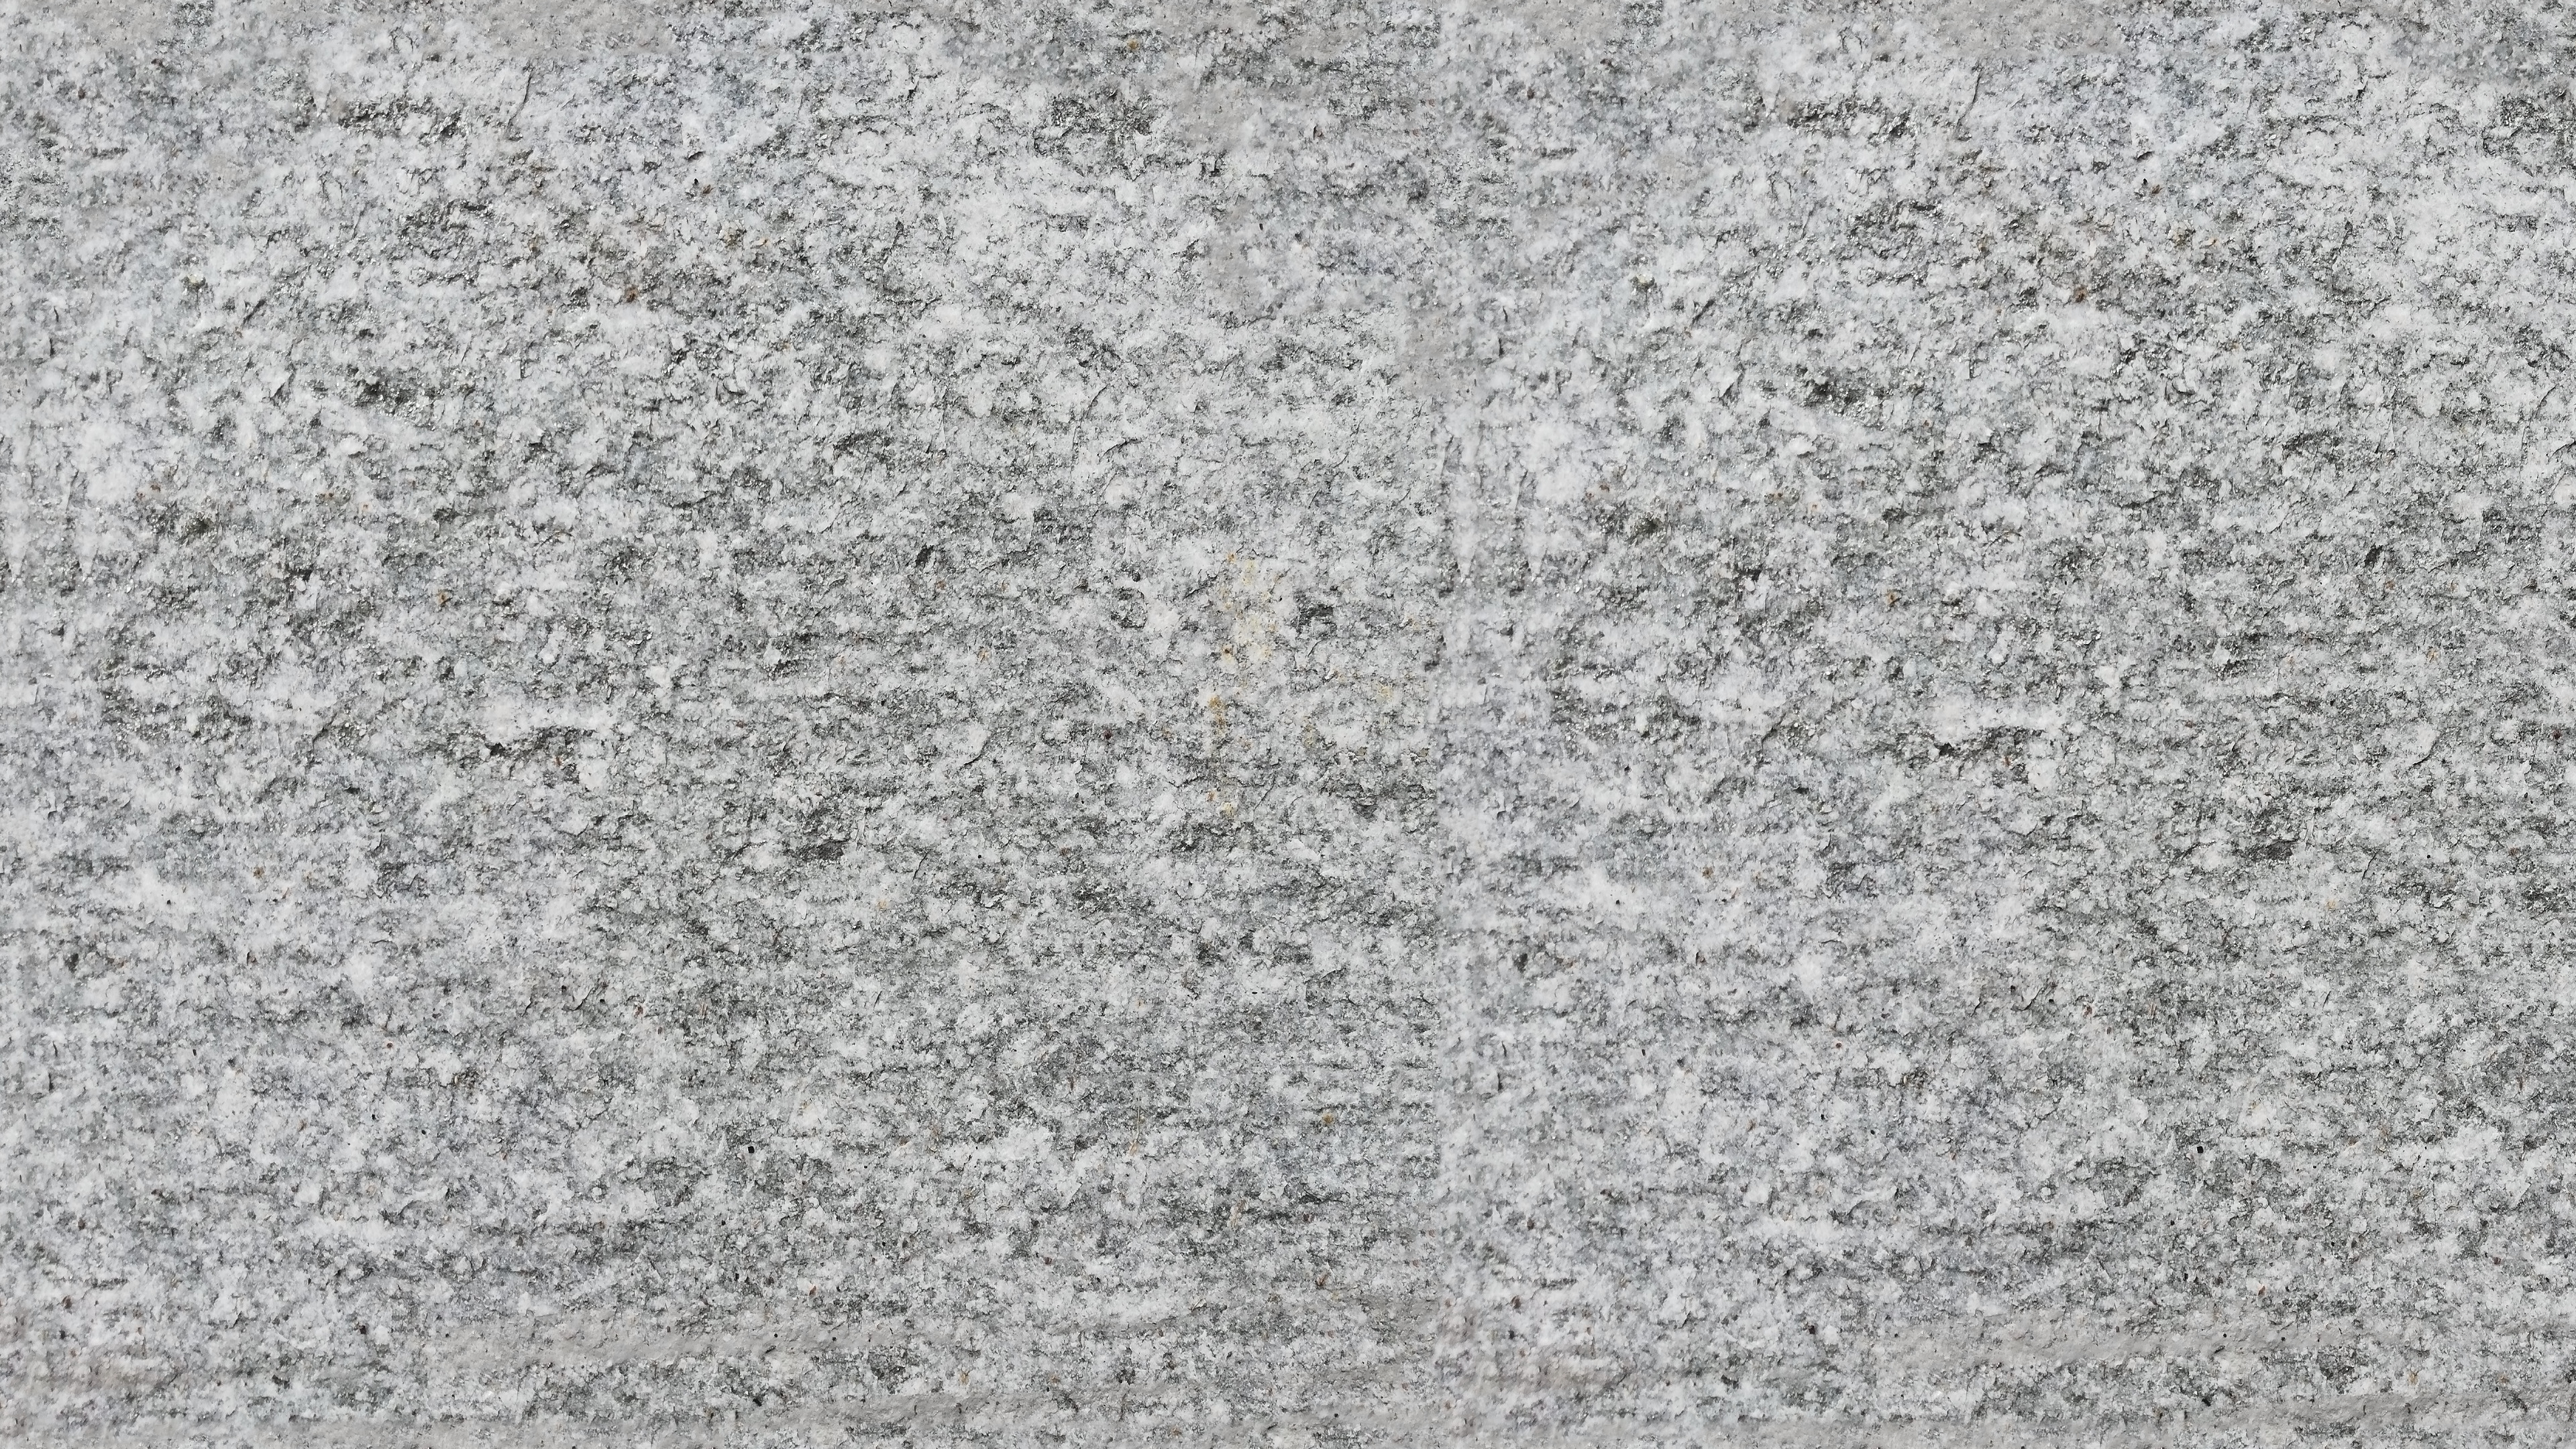 Granite stone texture to download - ManyTextures